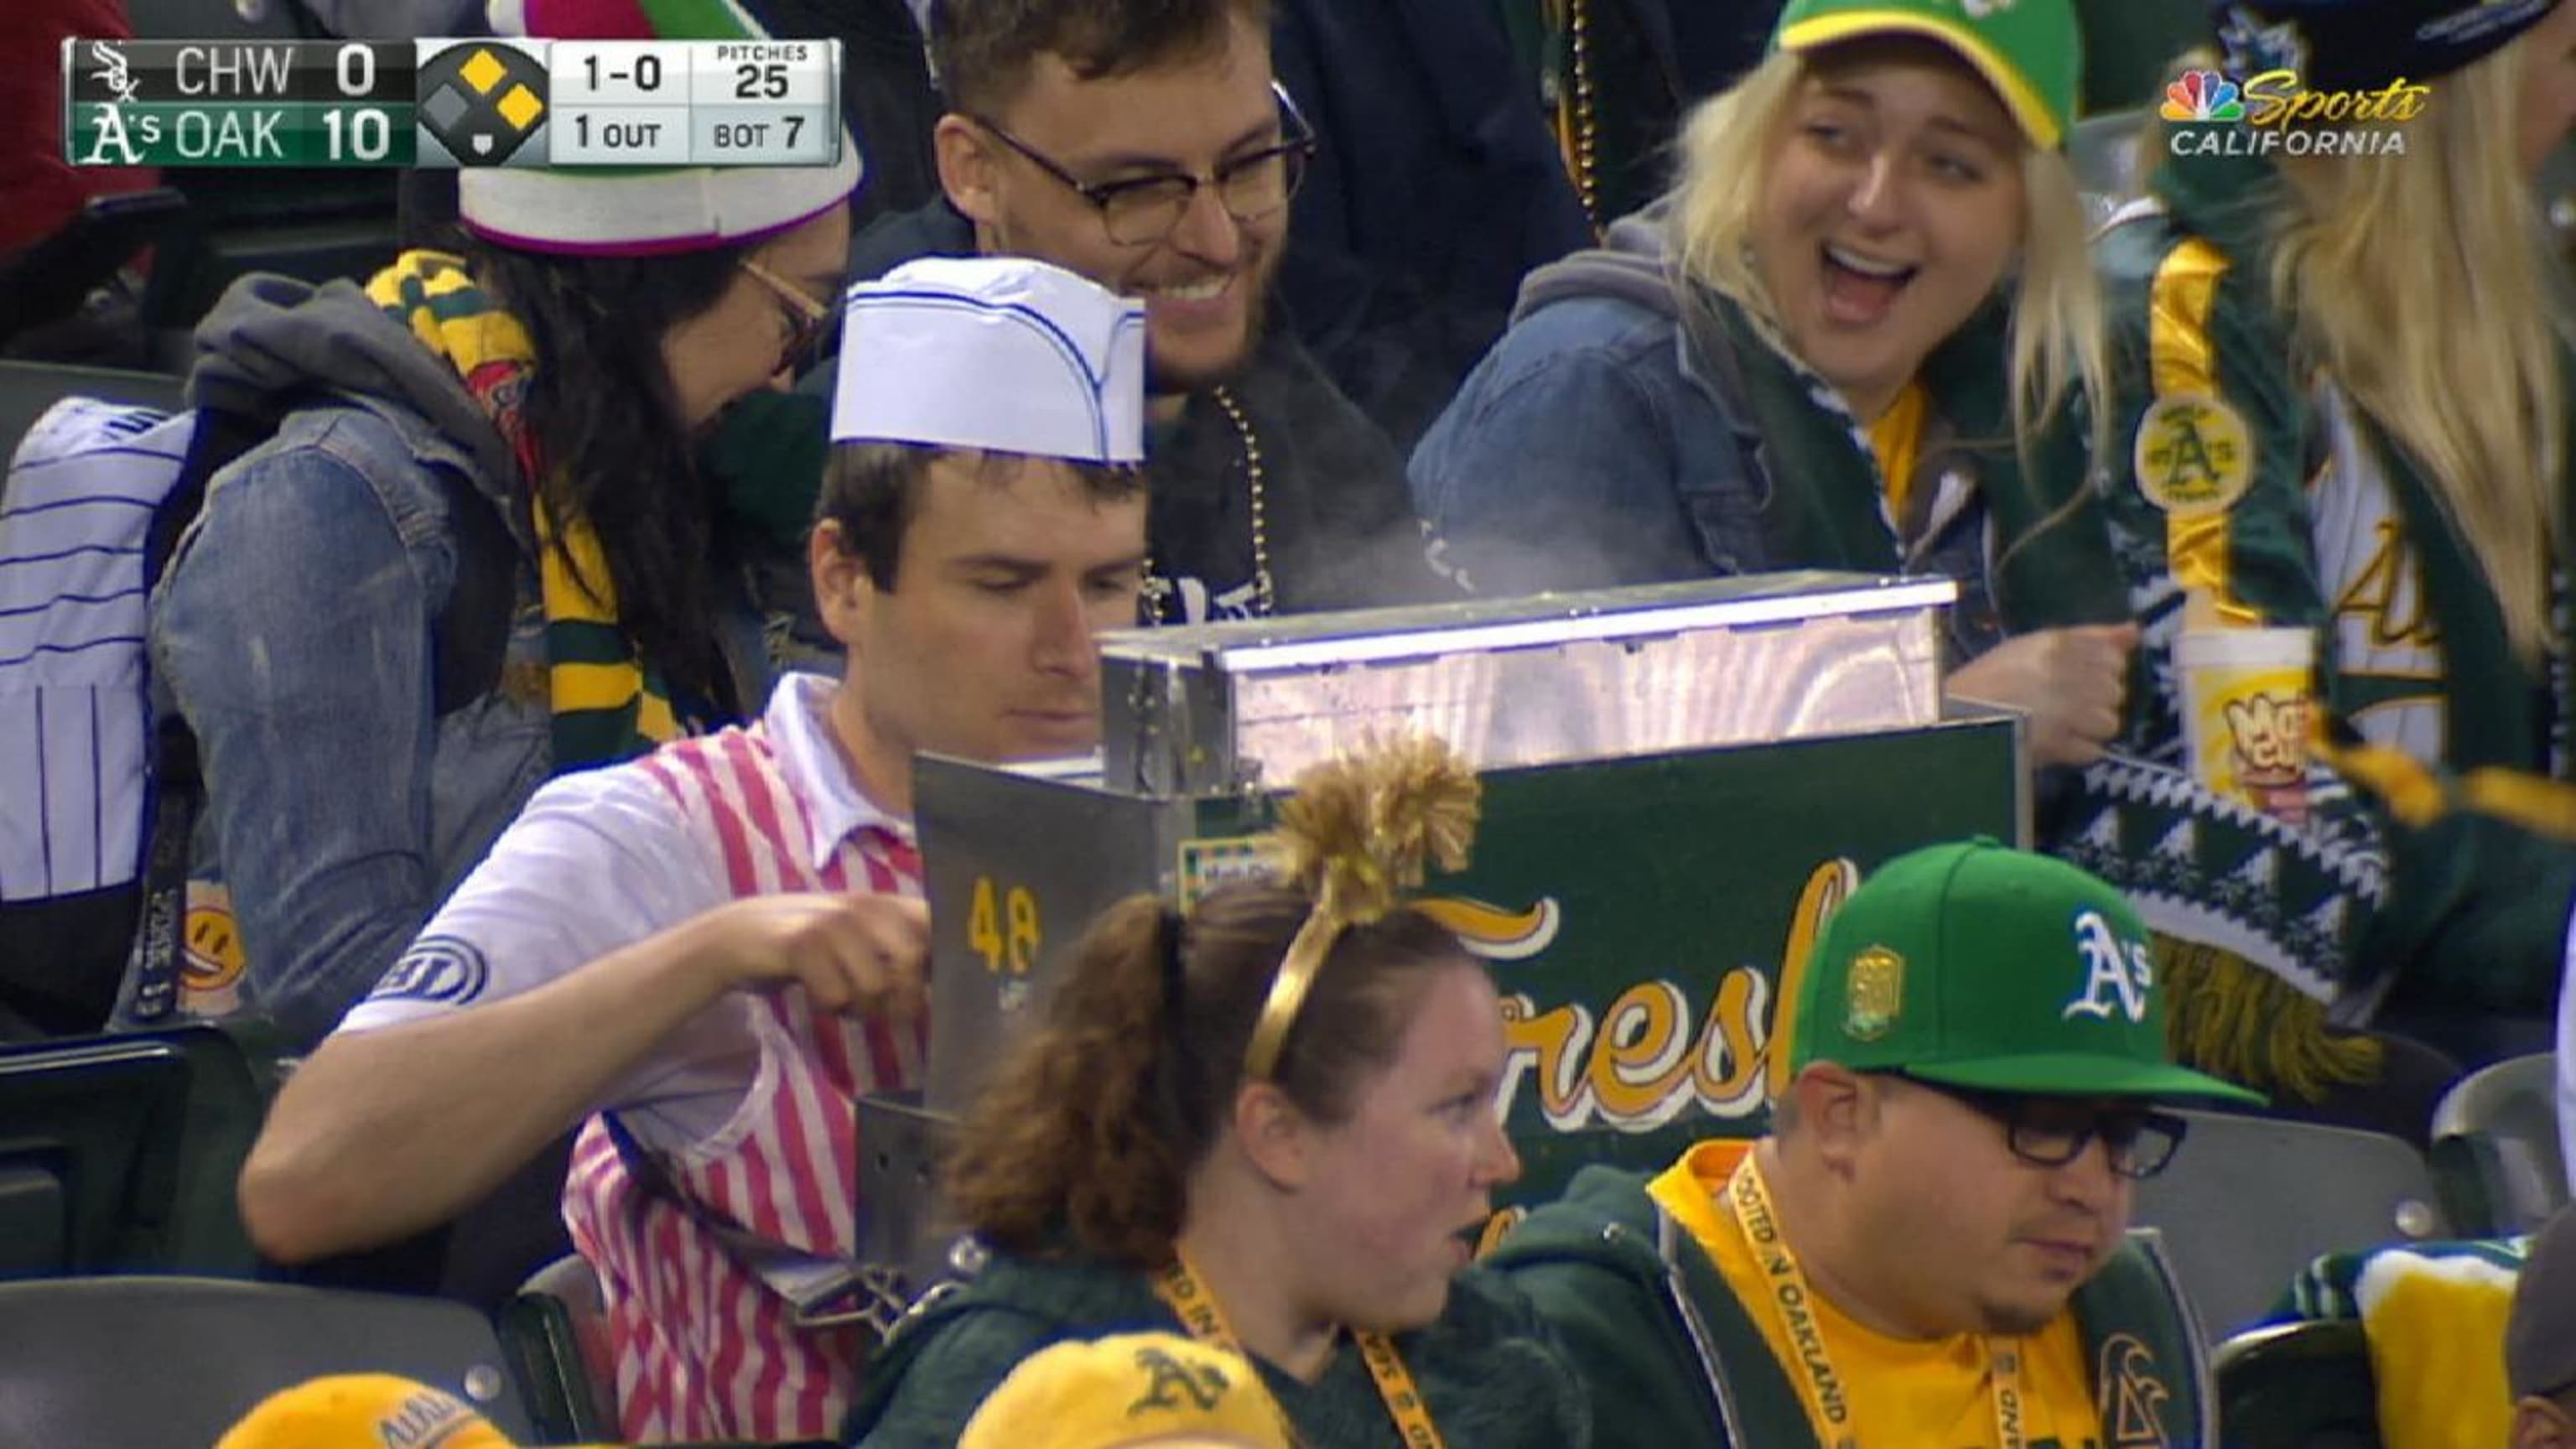 An A's hot dog vendor took a seat among some fans and kept working